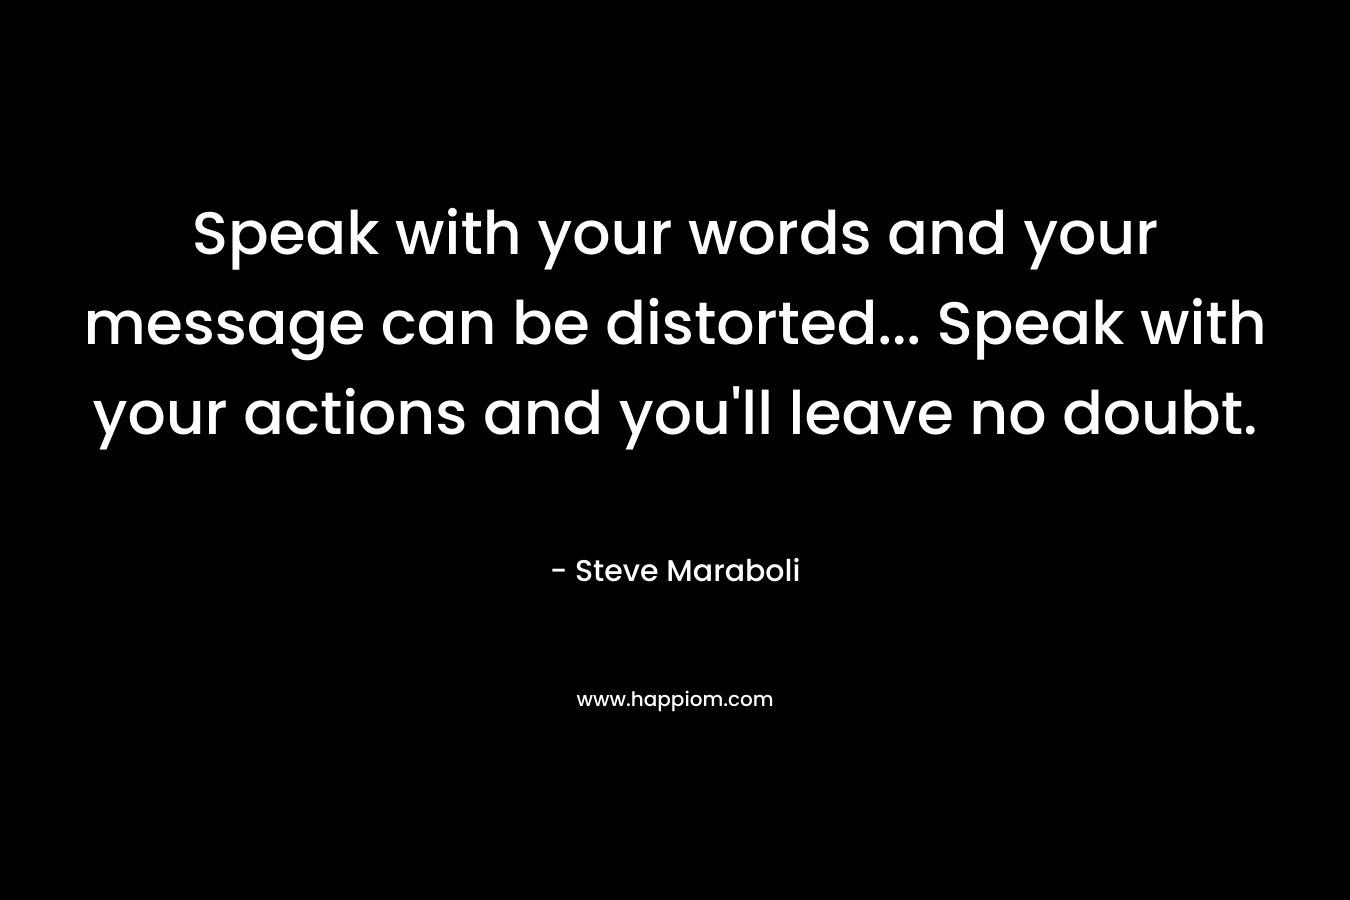 Speak with your words and your message can be distorted... Speak with your actions and you'll leave no doubt.